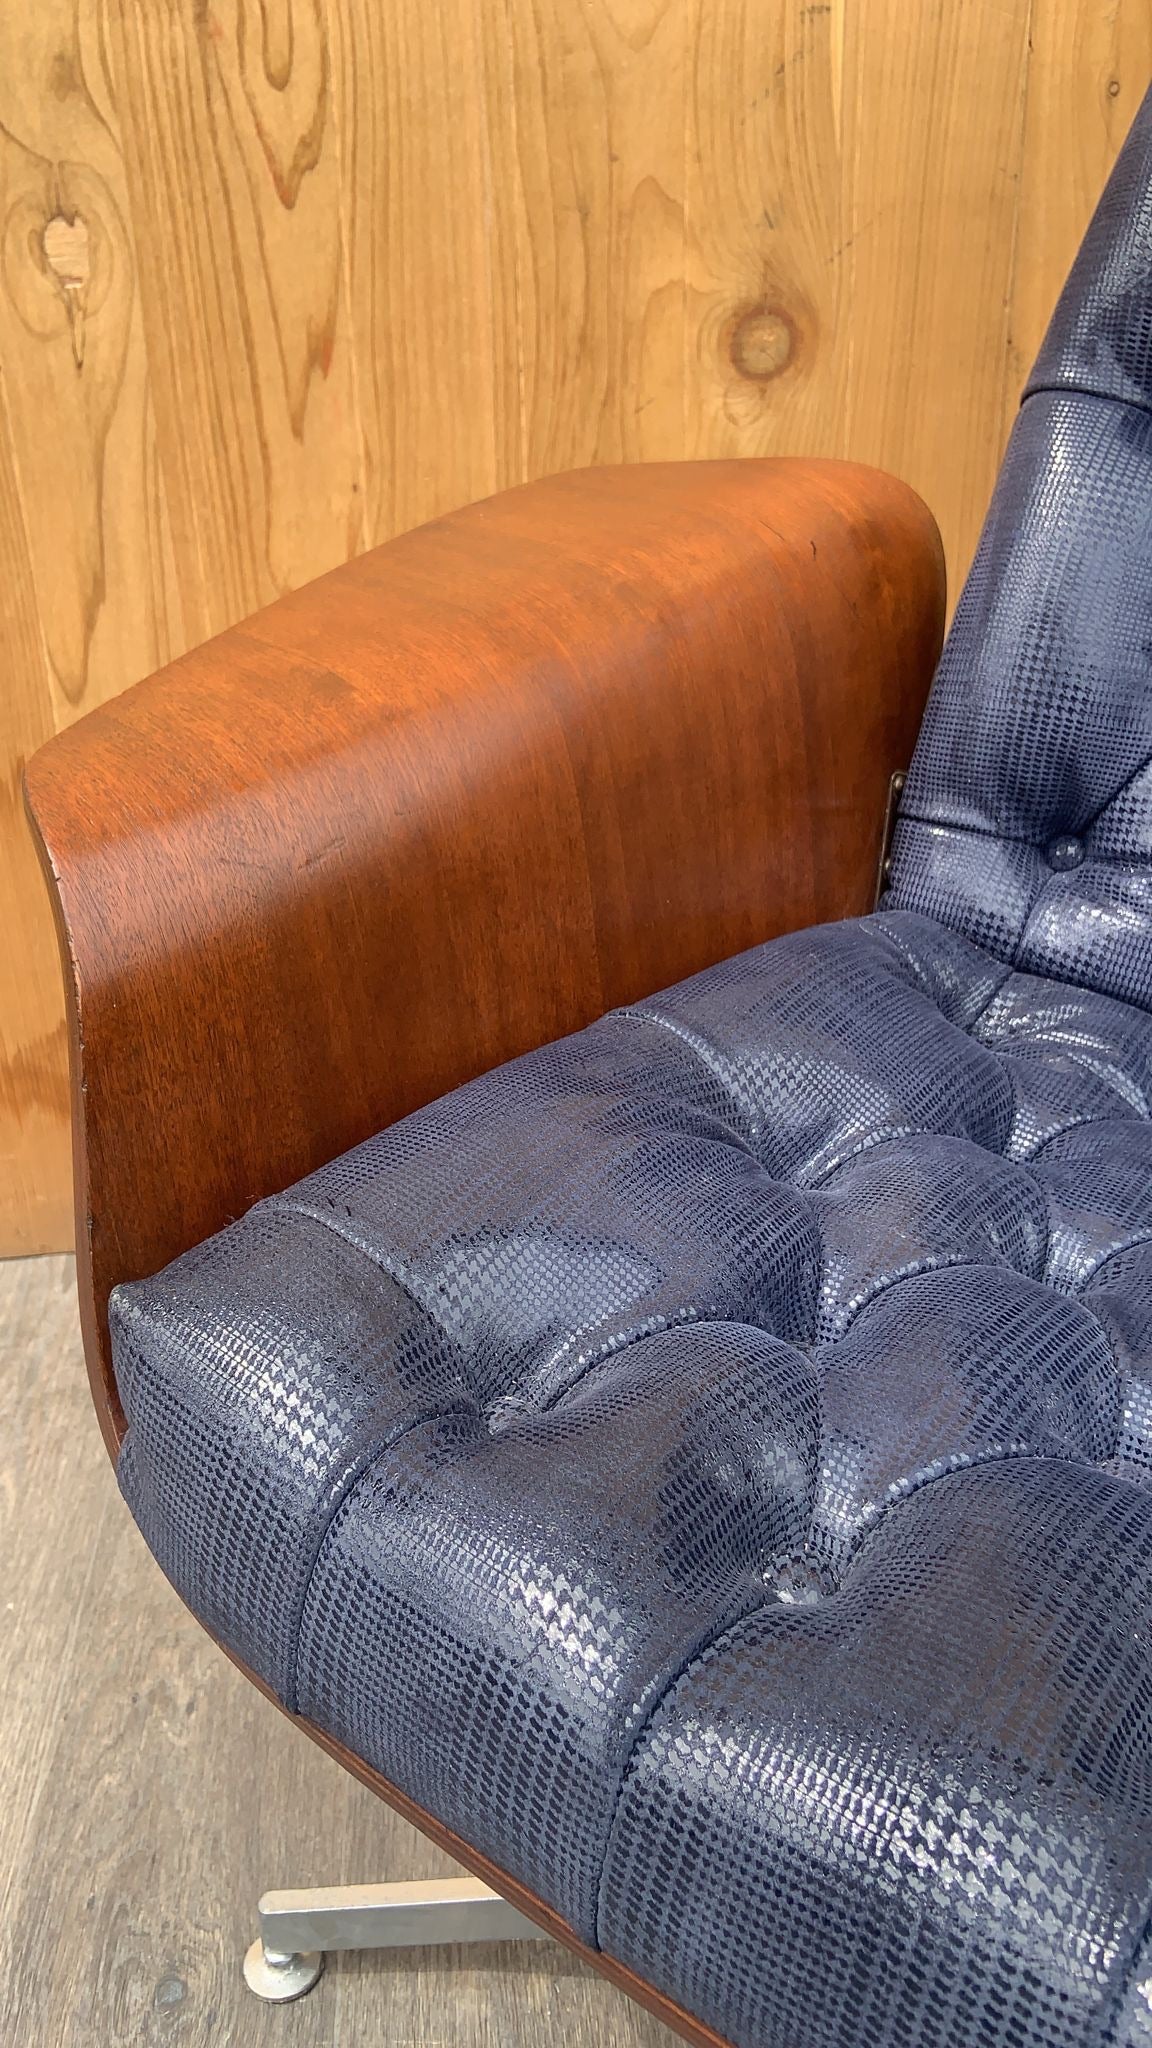 Mid Century Modern George Mulhauser for Plycraft "Mr. Chair" Lounge Newly Upholstered in Burberry Print Blue Leather